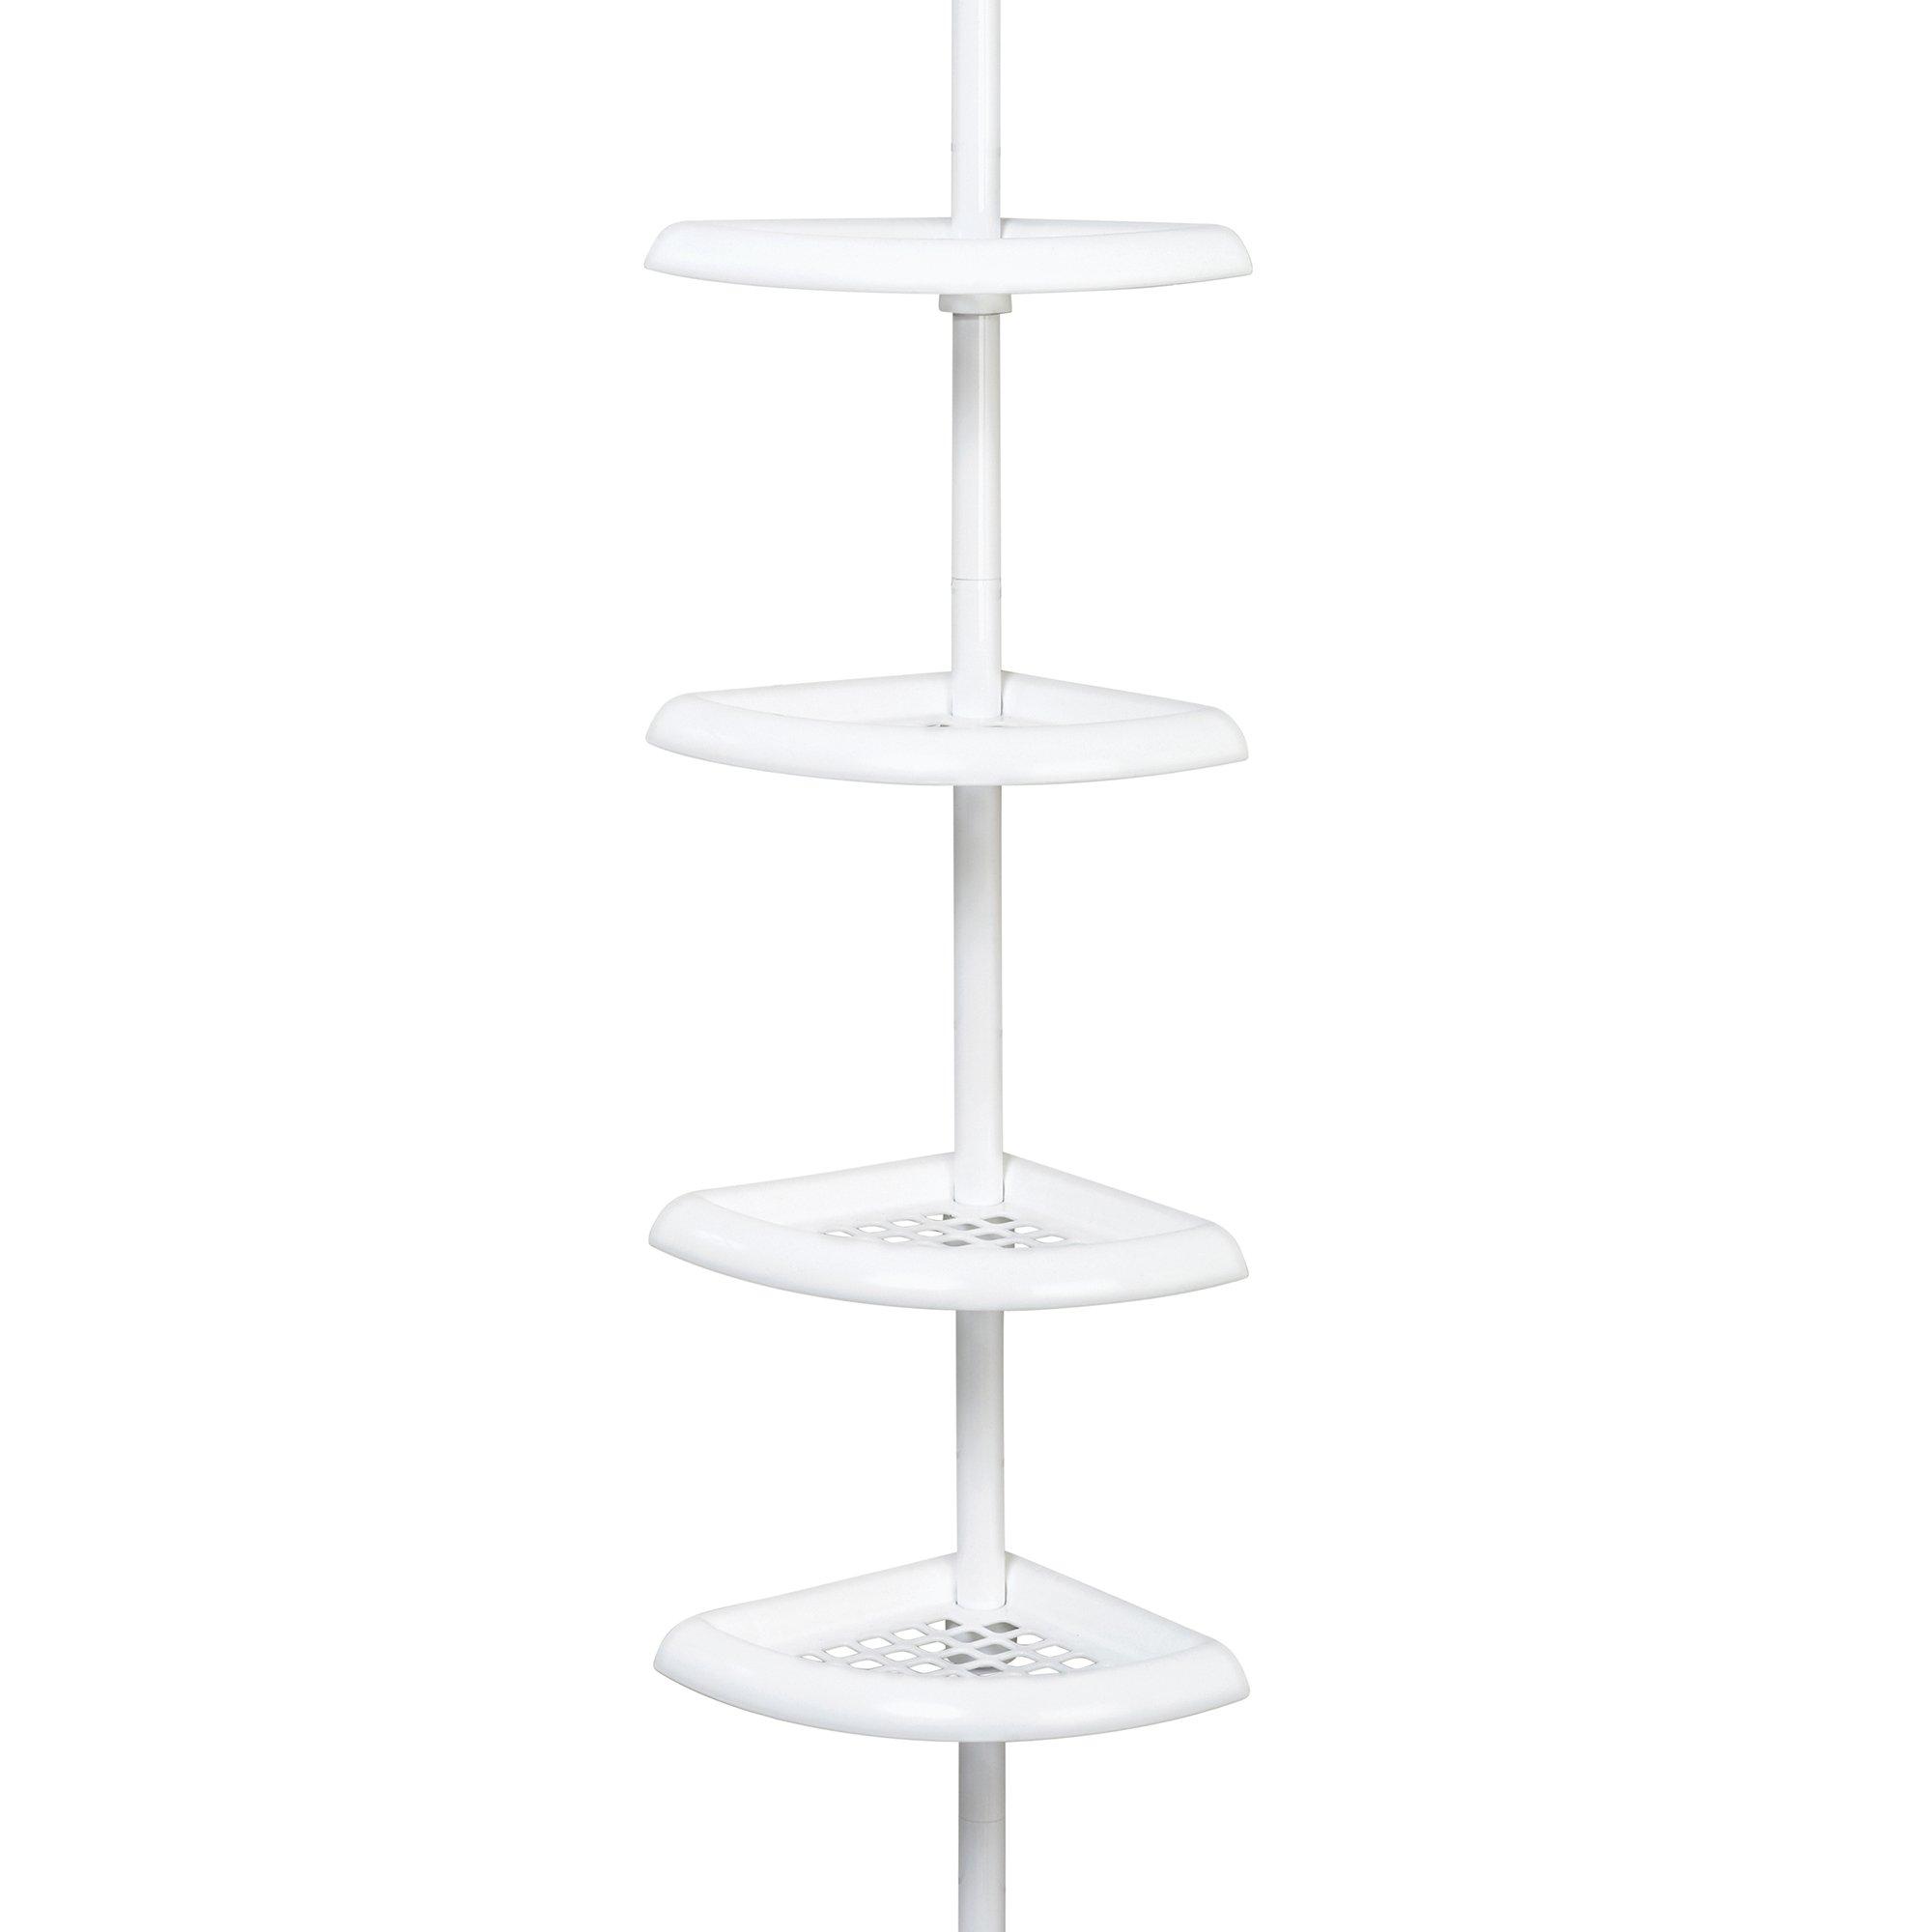 Zenna Home Expanding Tension Pole Shower Caddy